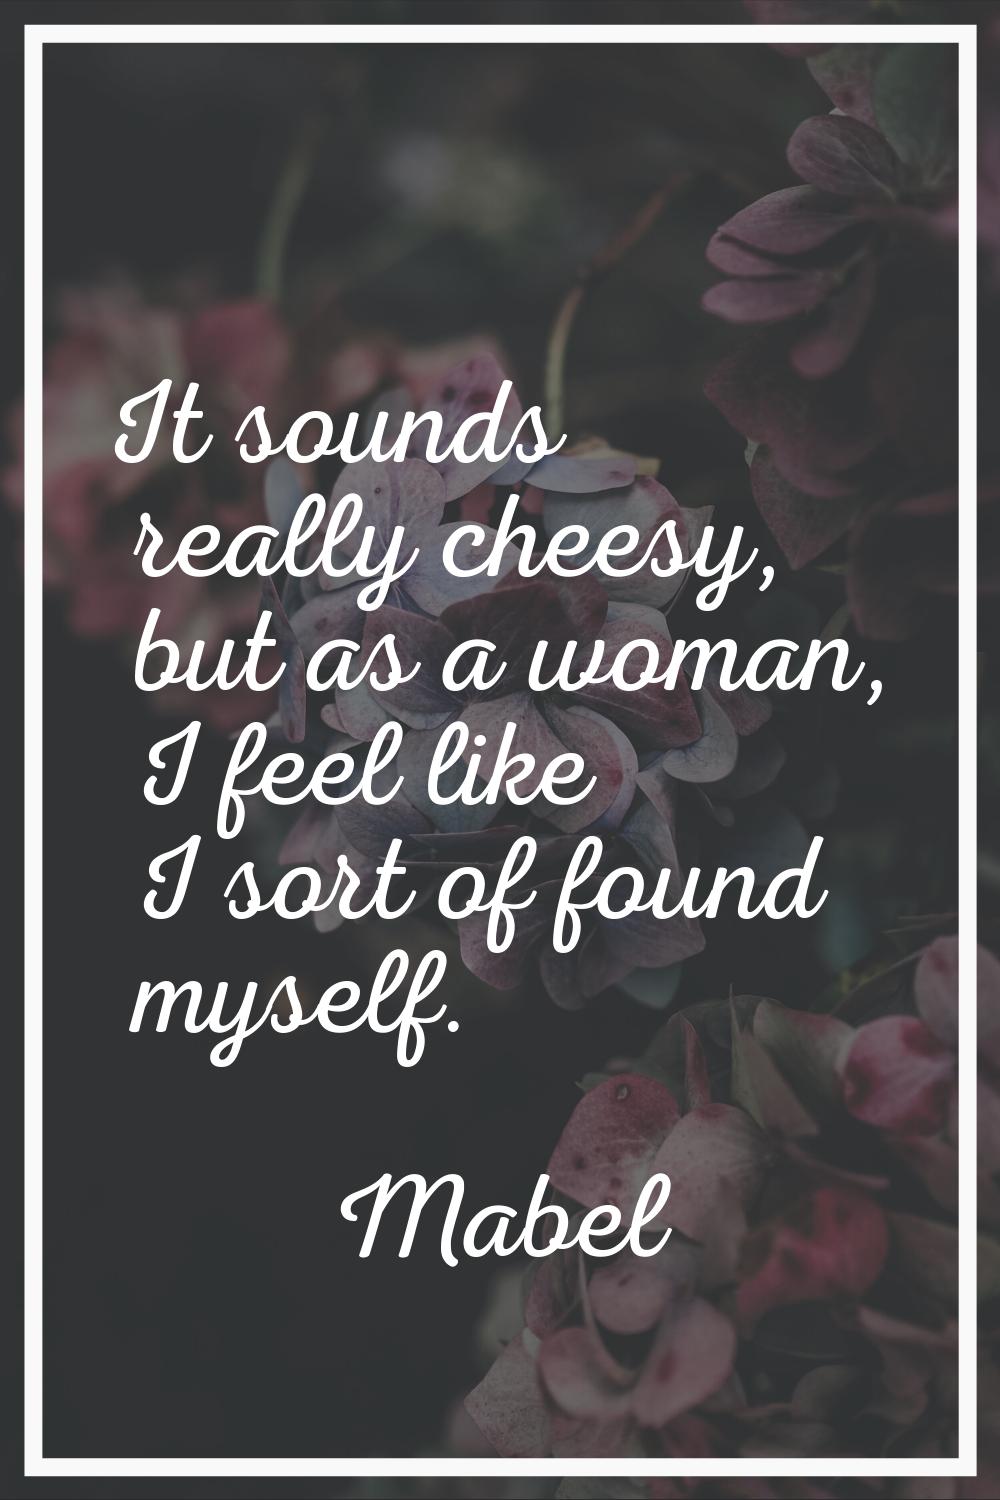 It sounds really cheesy, but as a woman, I feel like I sort of found myself.